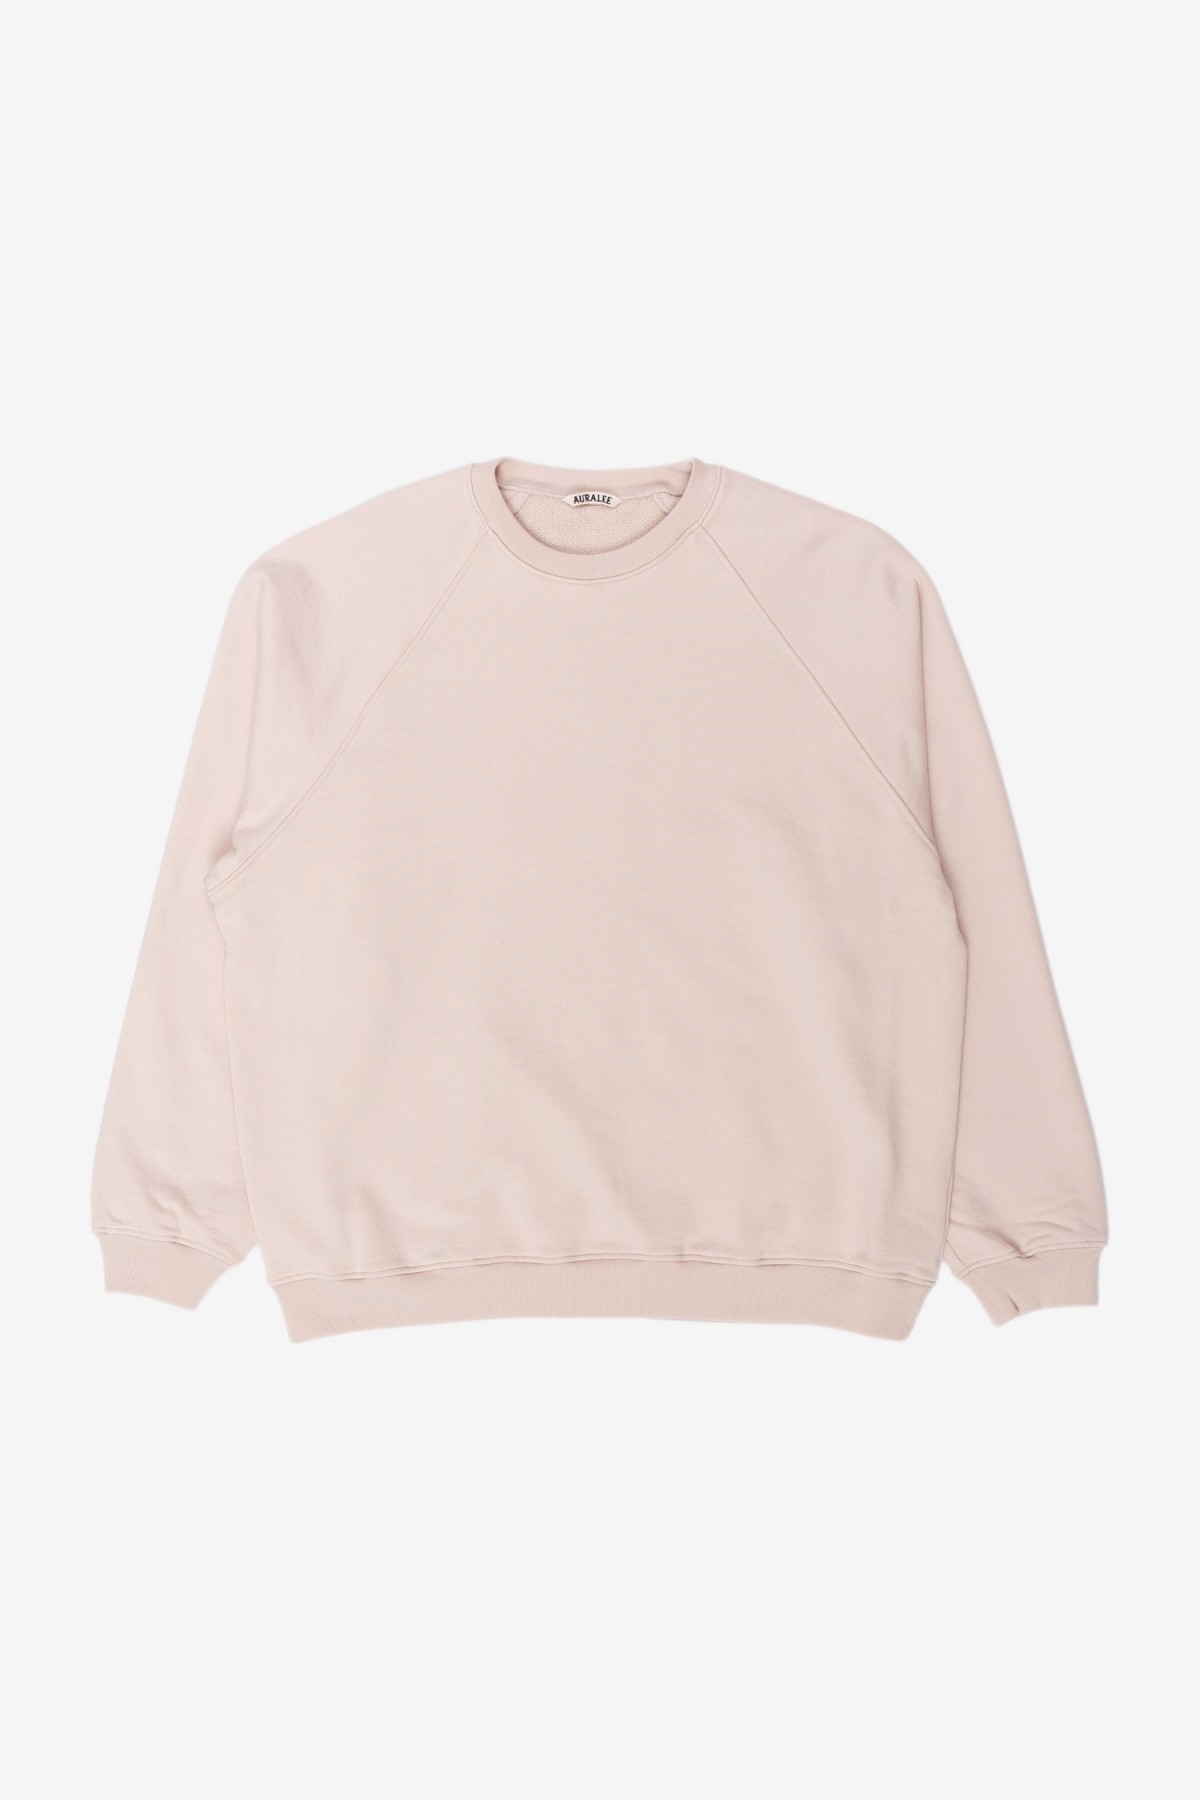 Auralee Smooth Soft Sweat P/O in Light Pink